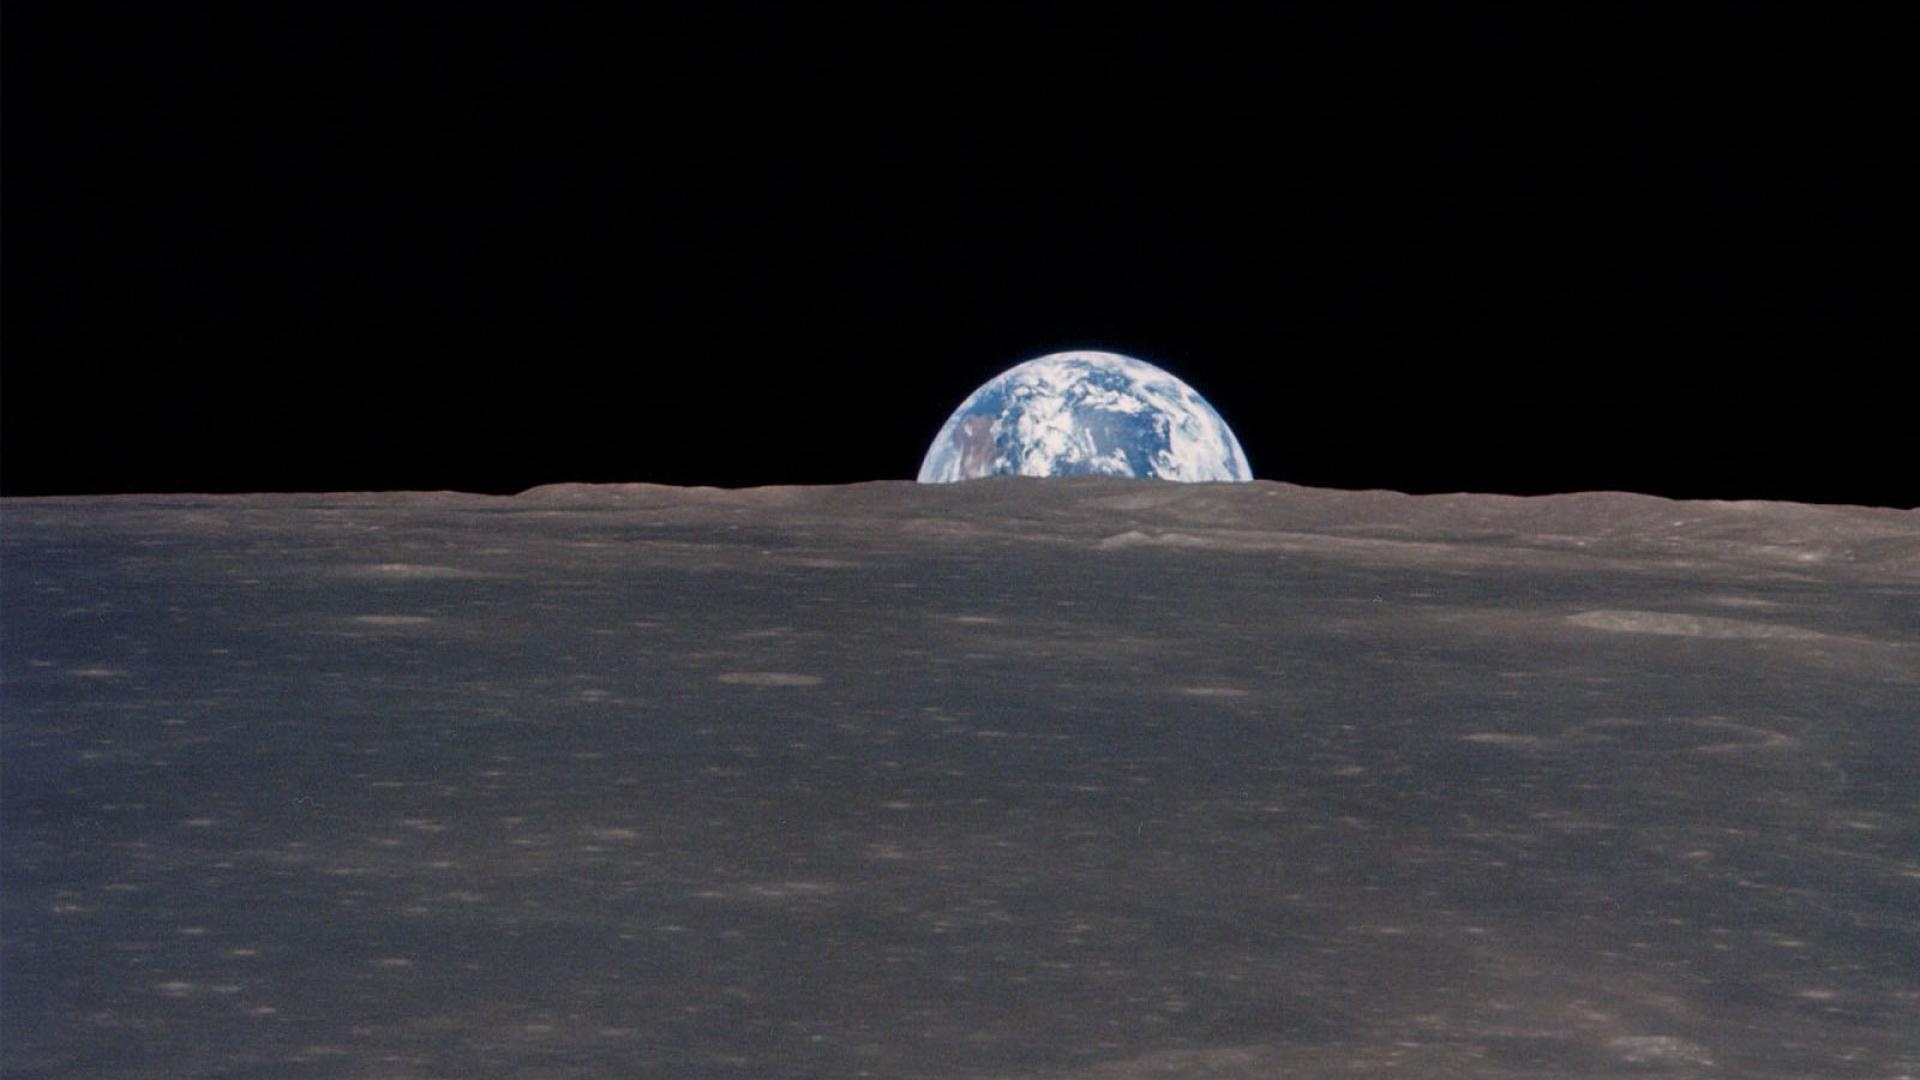 Apollo, Fascinating wallpapers, Astronauts' courage, Space exploration, 1920x1080 Full HD Desktop